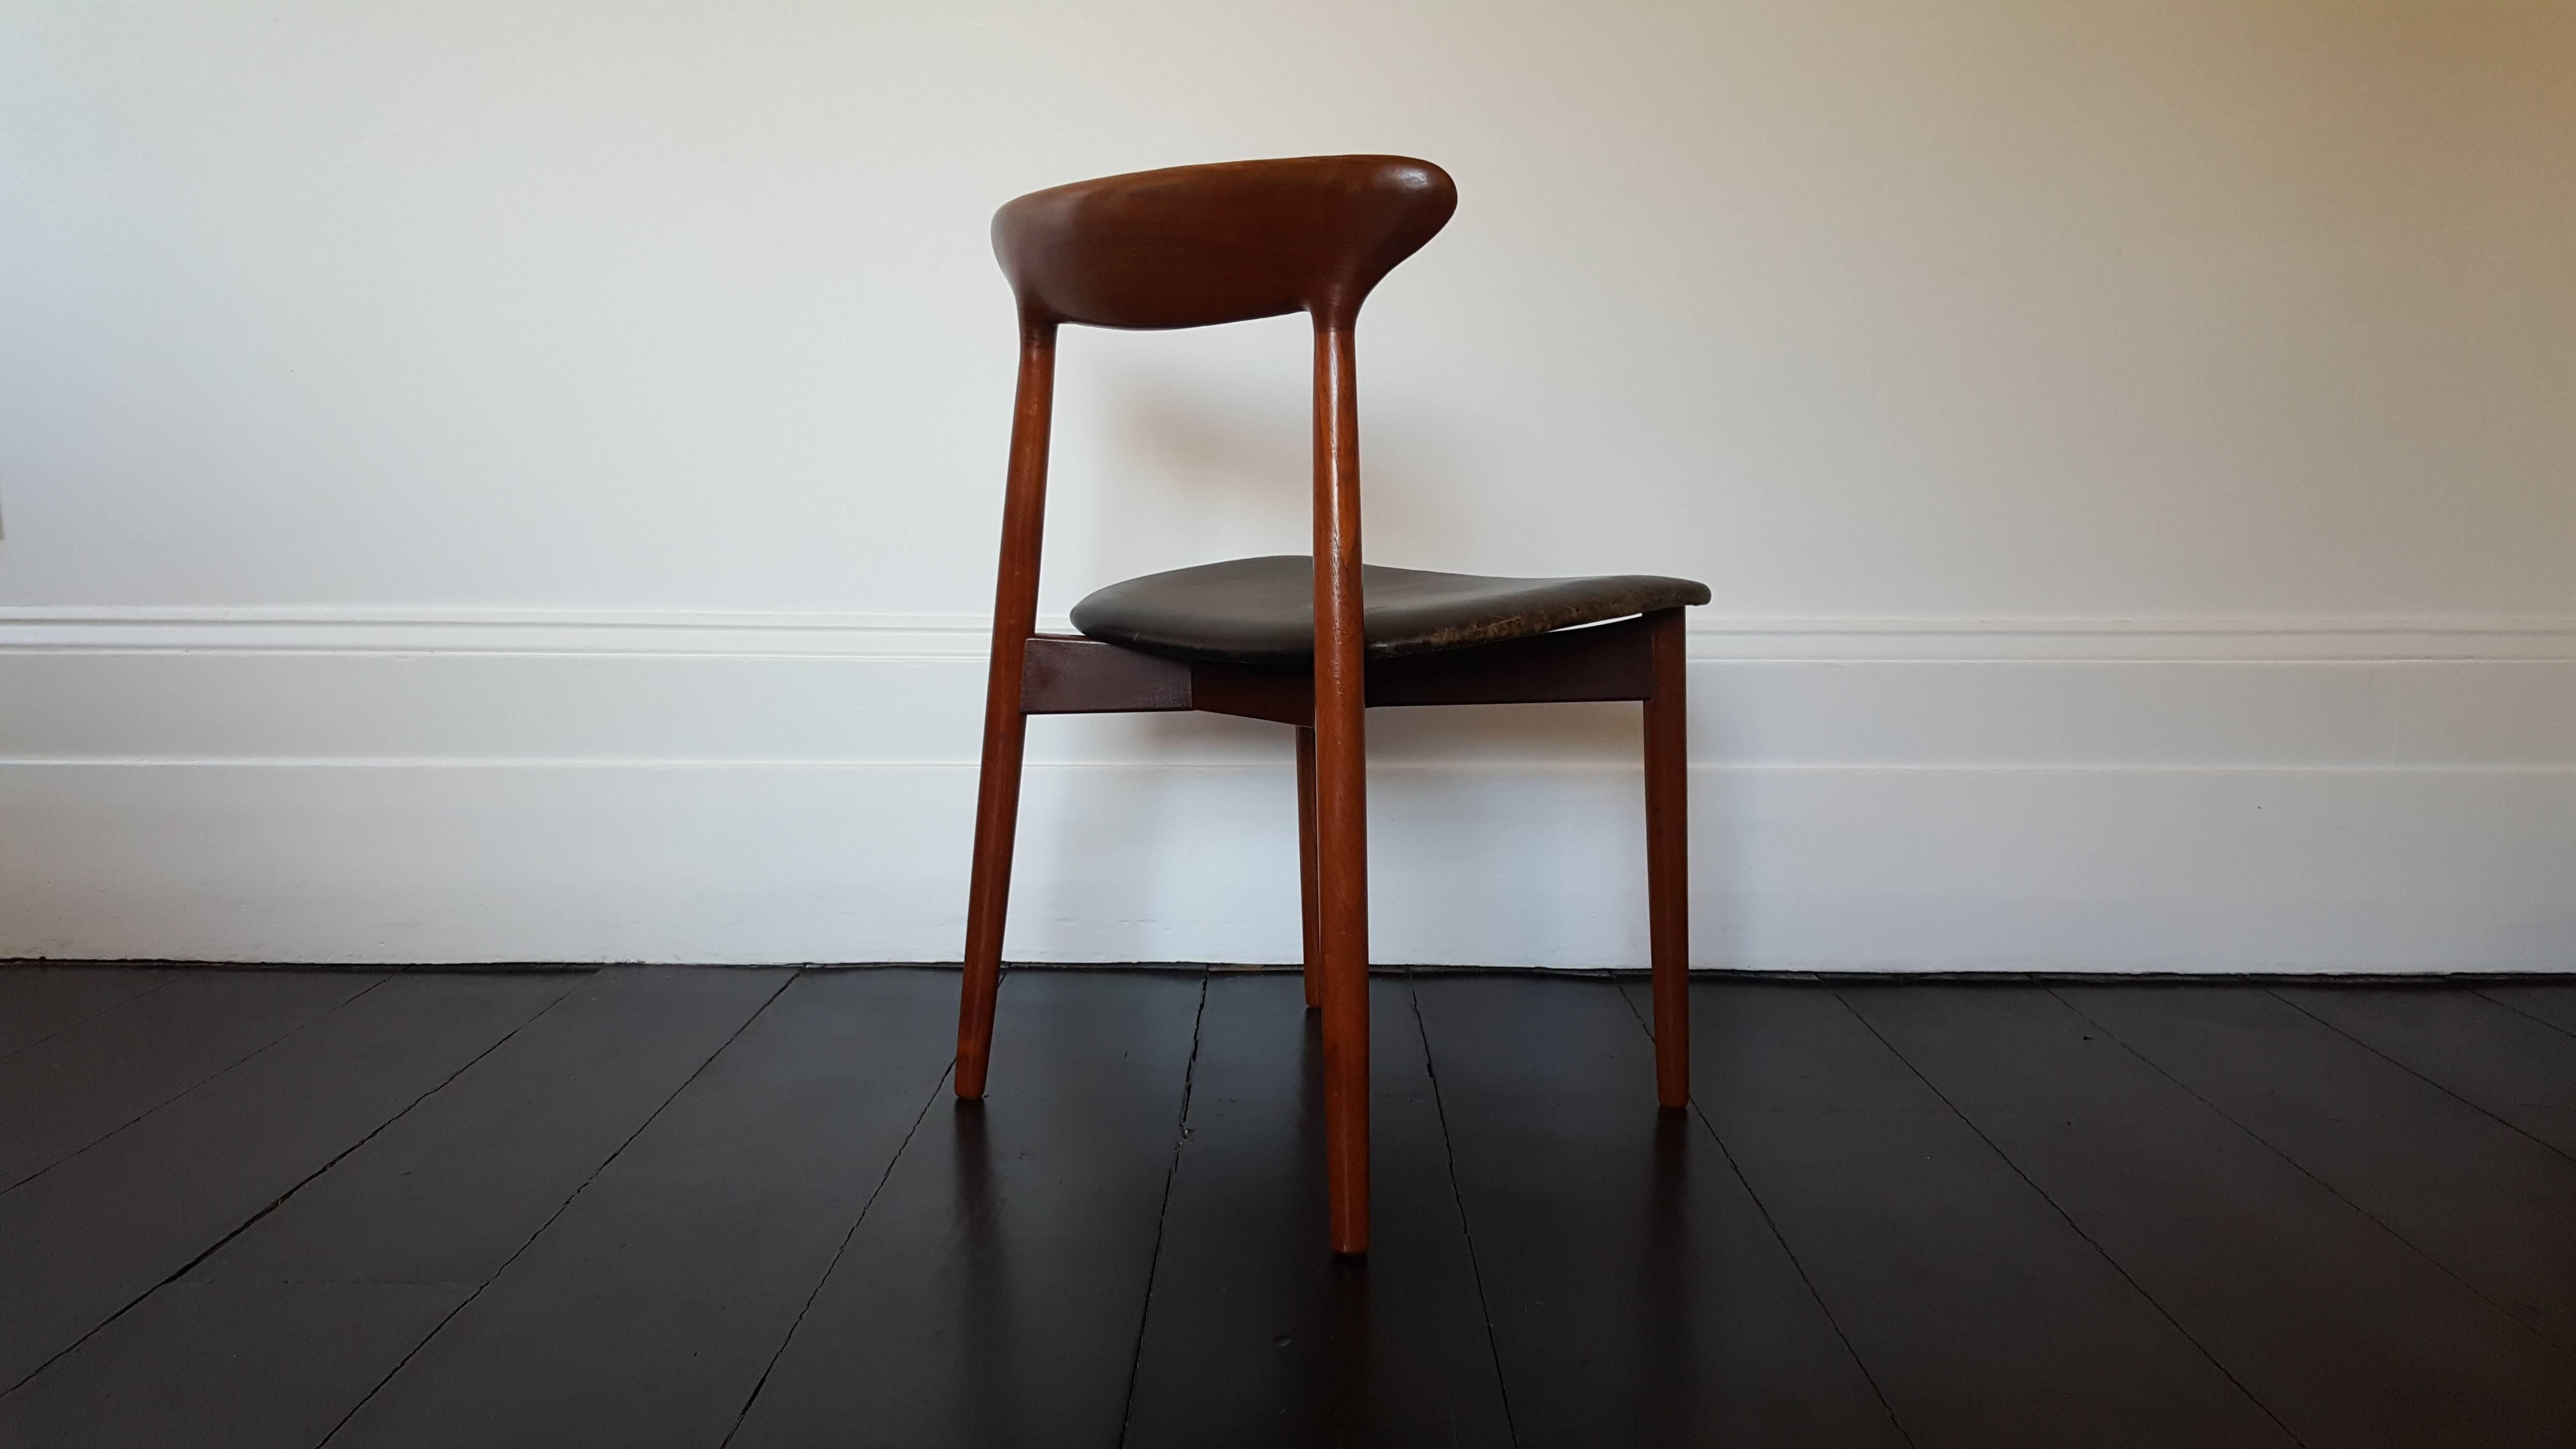 Beautiful Harry Østergaard for Randers Møbelfabrik, model 59 chair produced in the 1960s

We ship globally! Please contact to discuss.